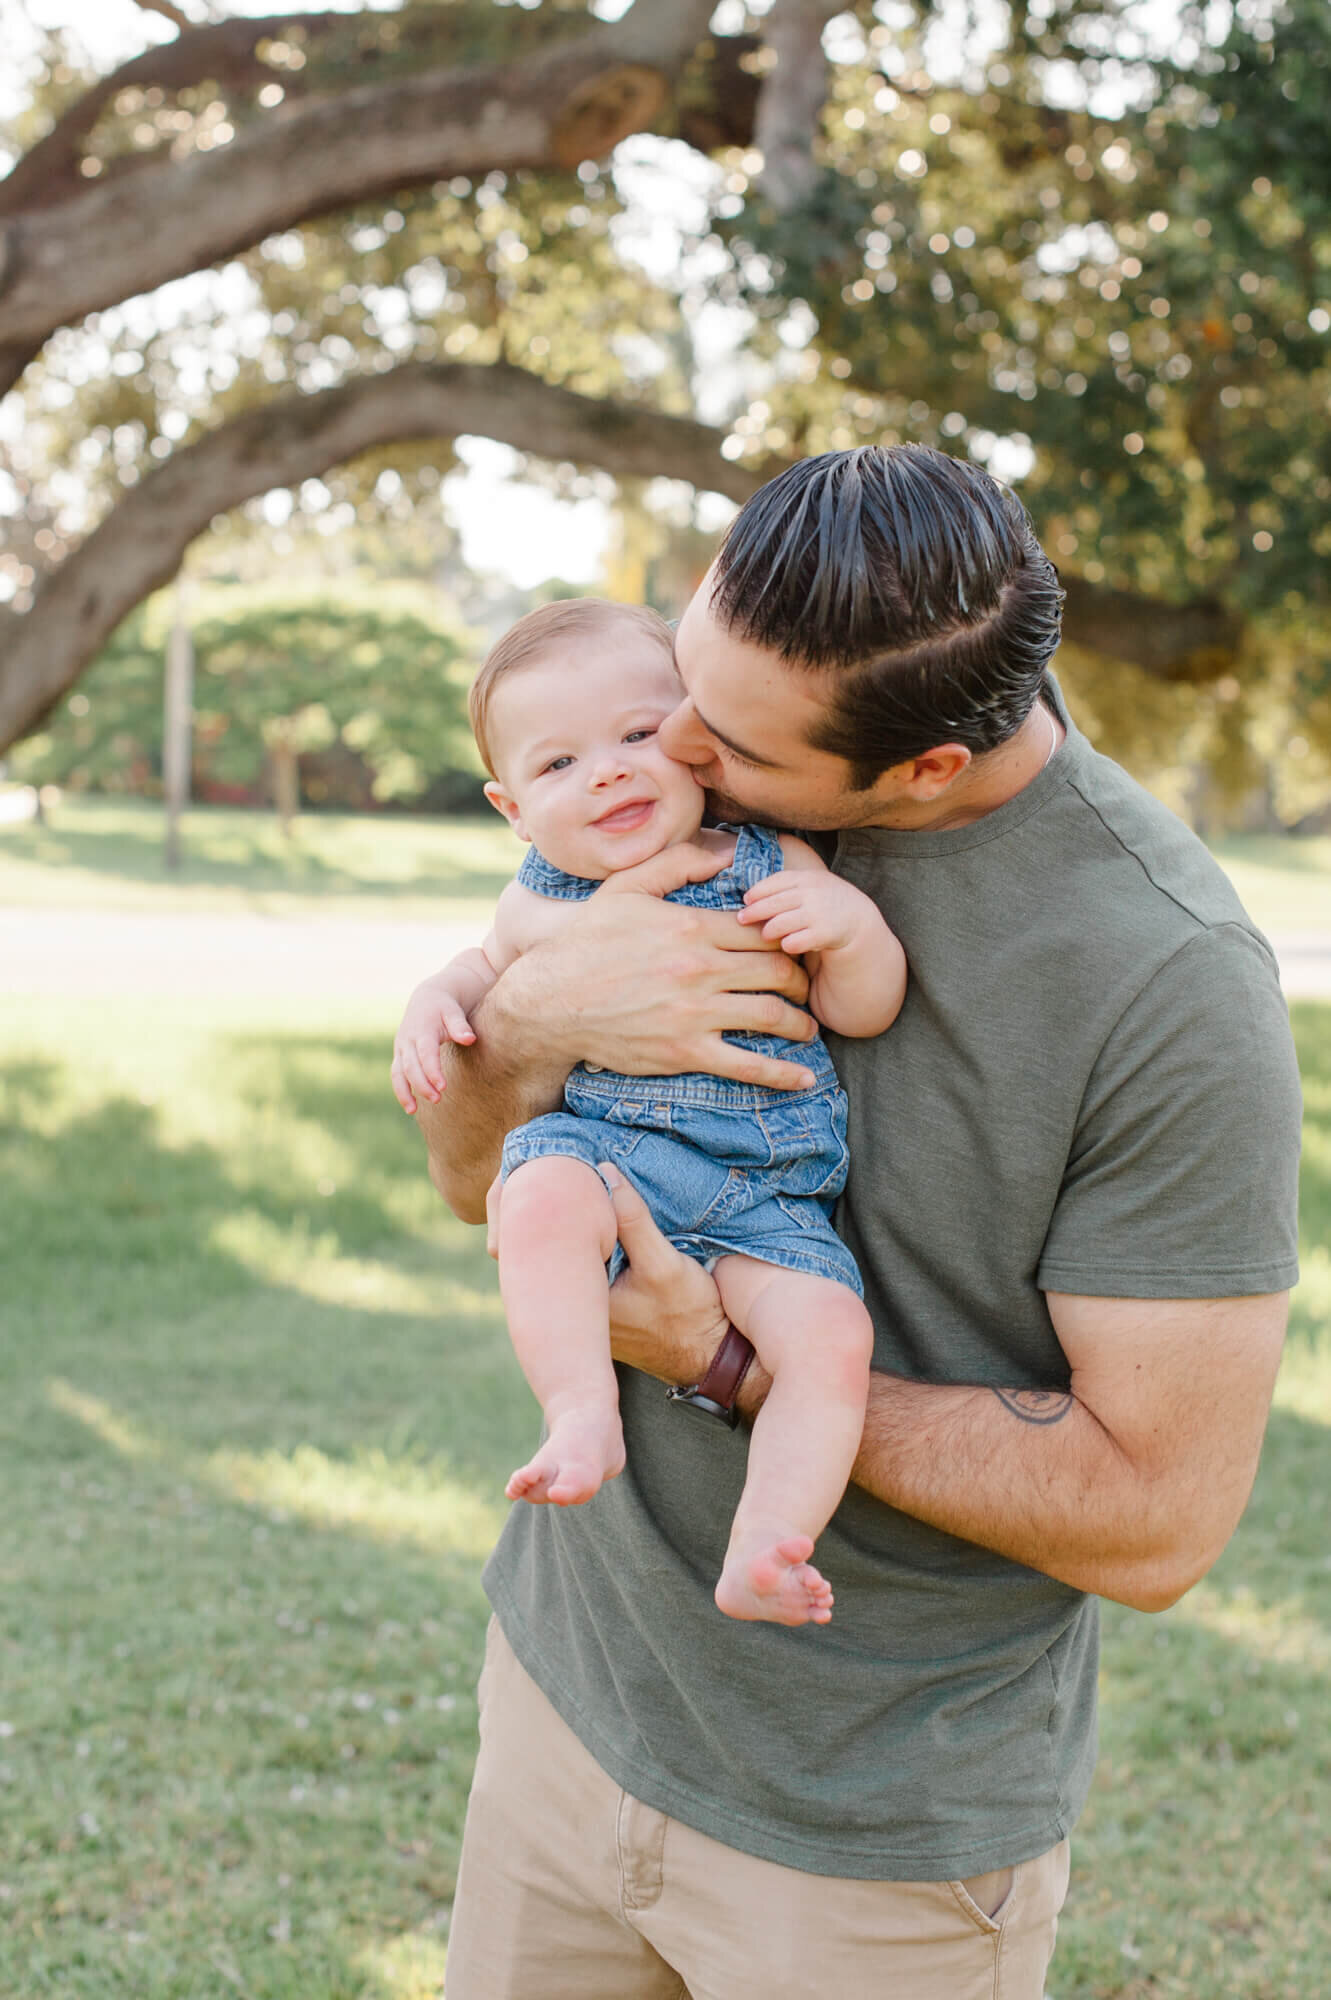 Dad holding son and kissing him on the cheek during their morning session